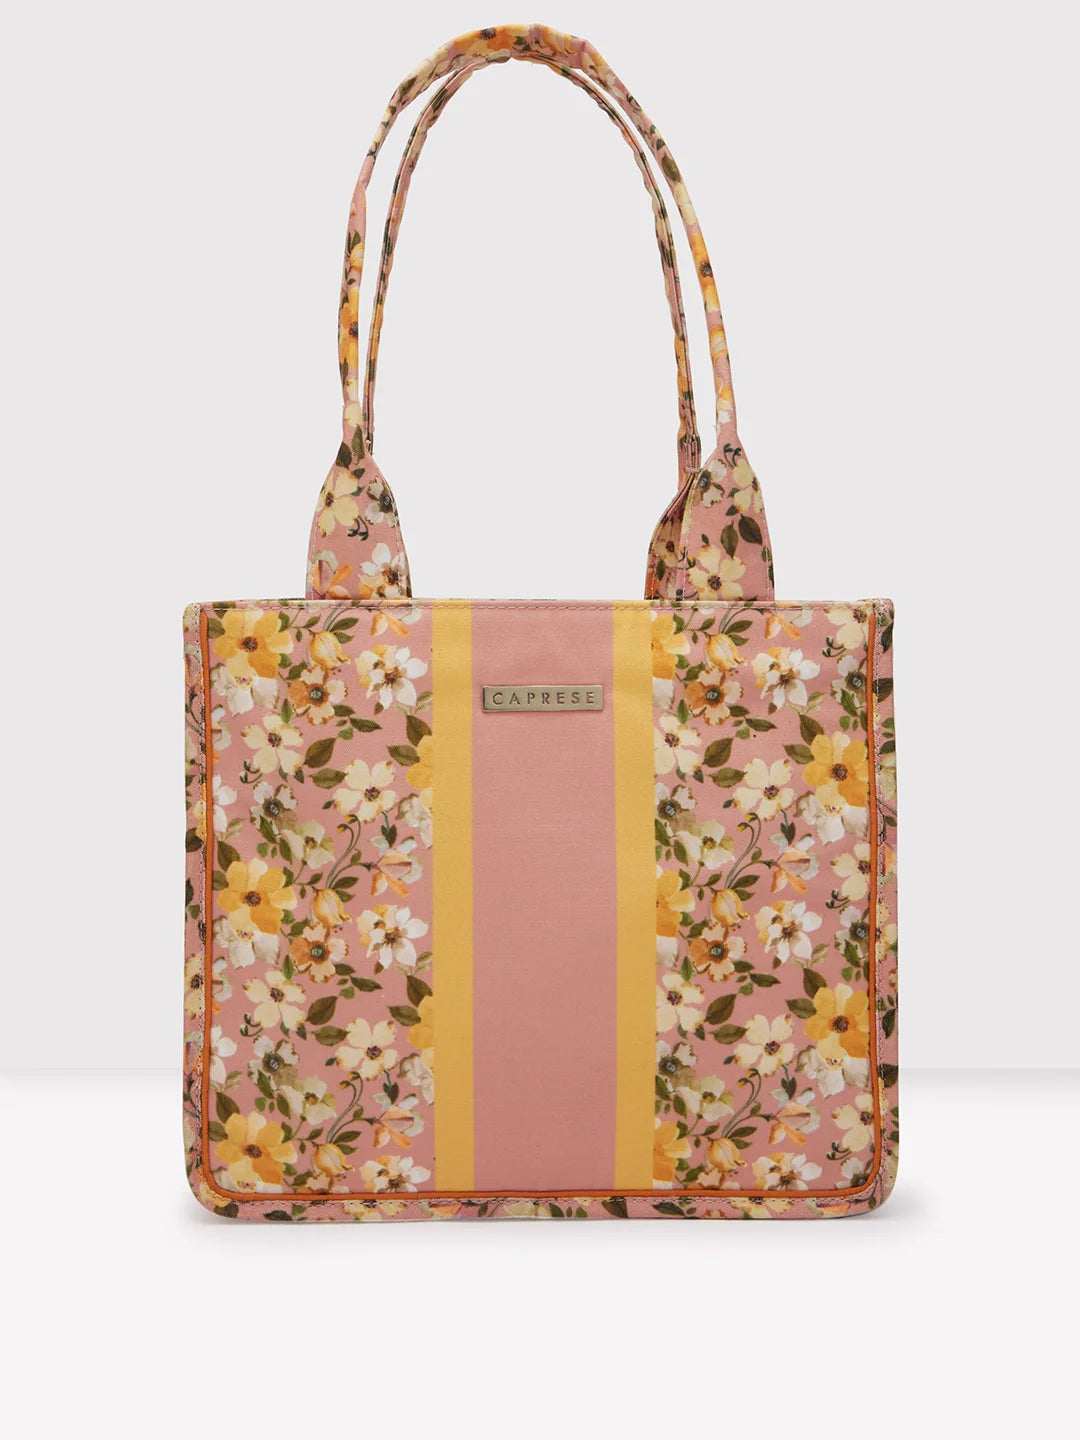 Caprese ORCHID TOTE LARGE YELLOW